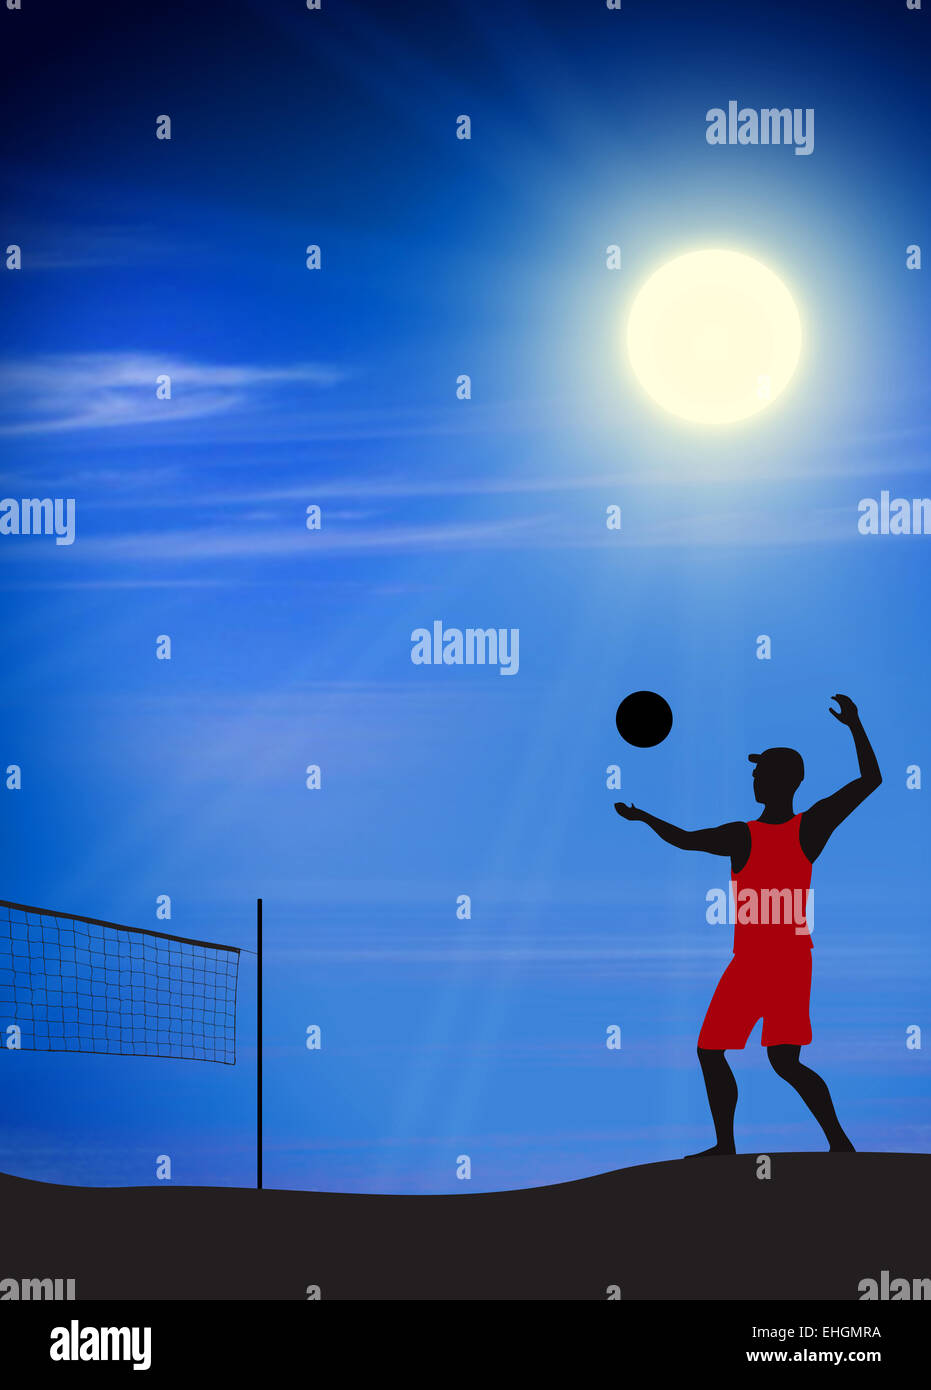 Sport poster: Beach Volleyball serve background with space Stock Photo ...